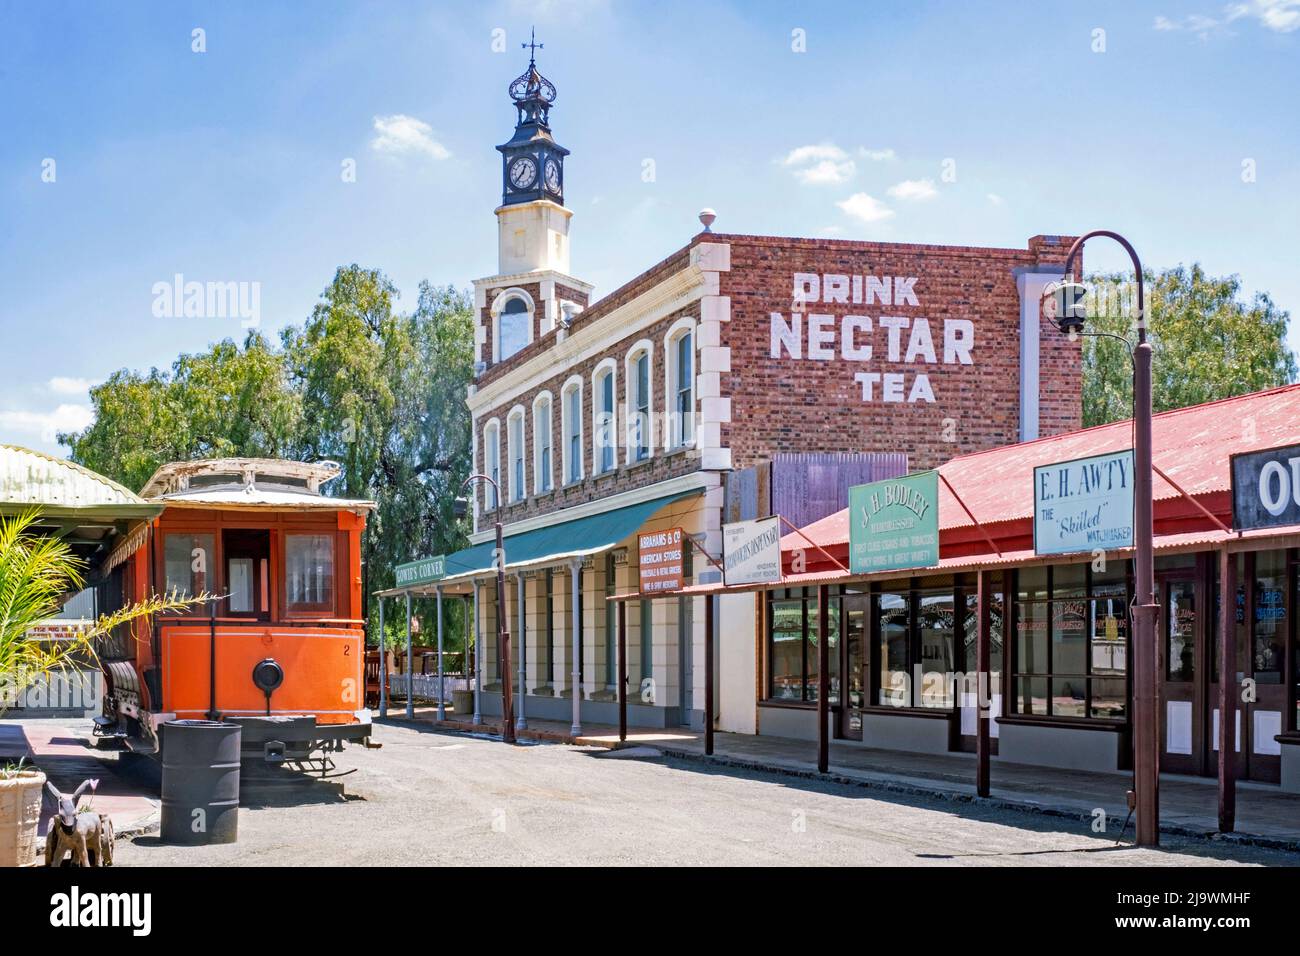 Old tram and Victorian buildings / shops of the Big Hole and Open Mine Museum in Kimberley, Frances Baard, Northern Cape province, South Africa Stock Photo